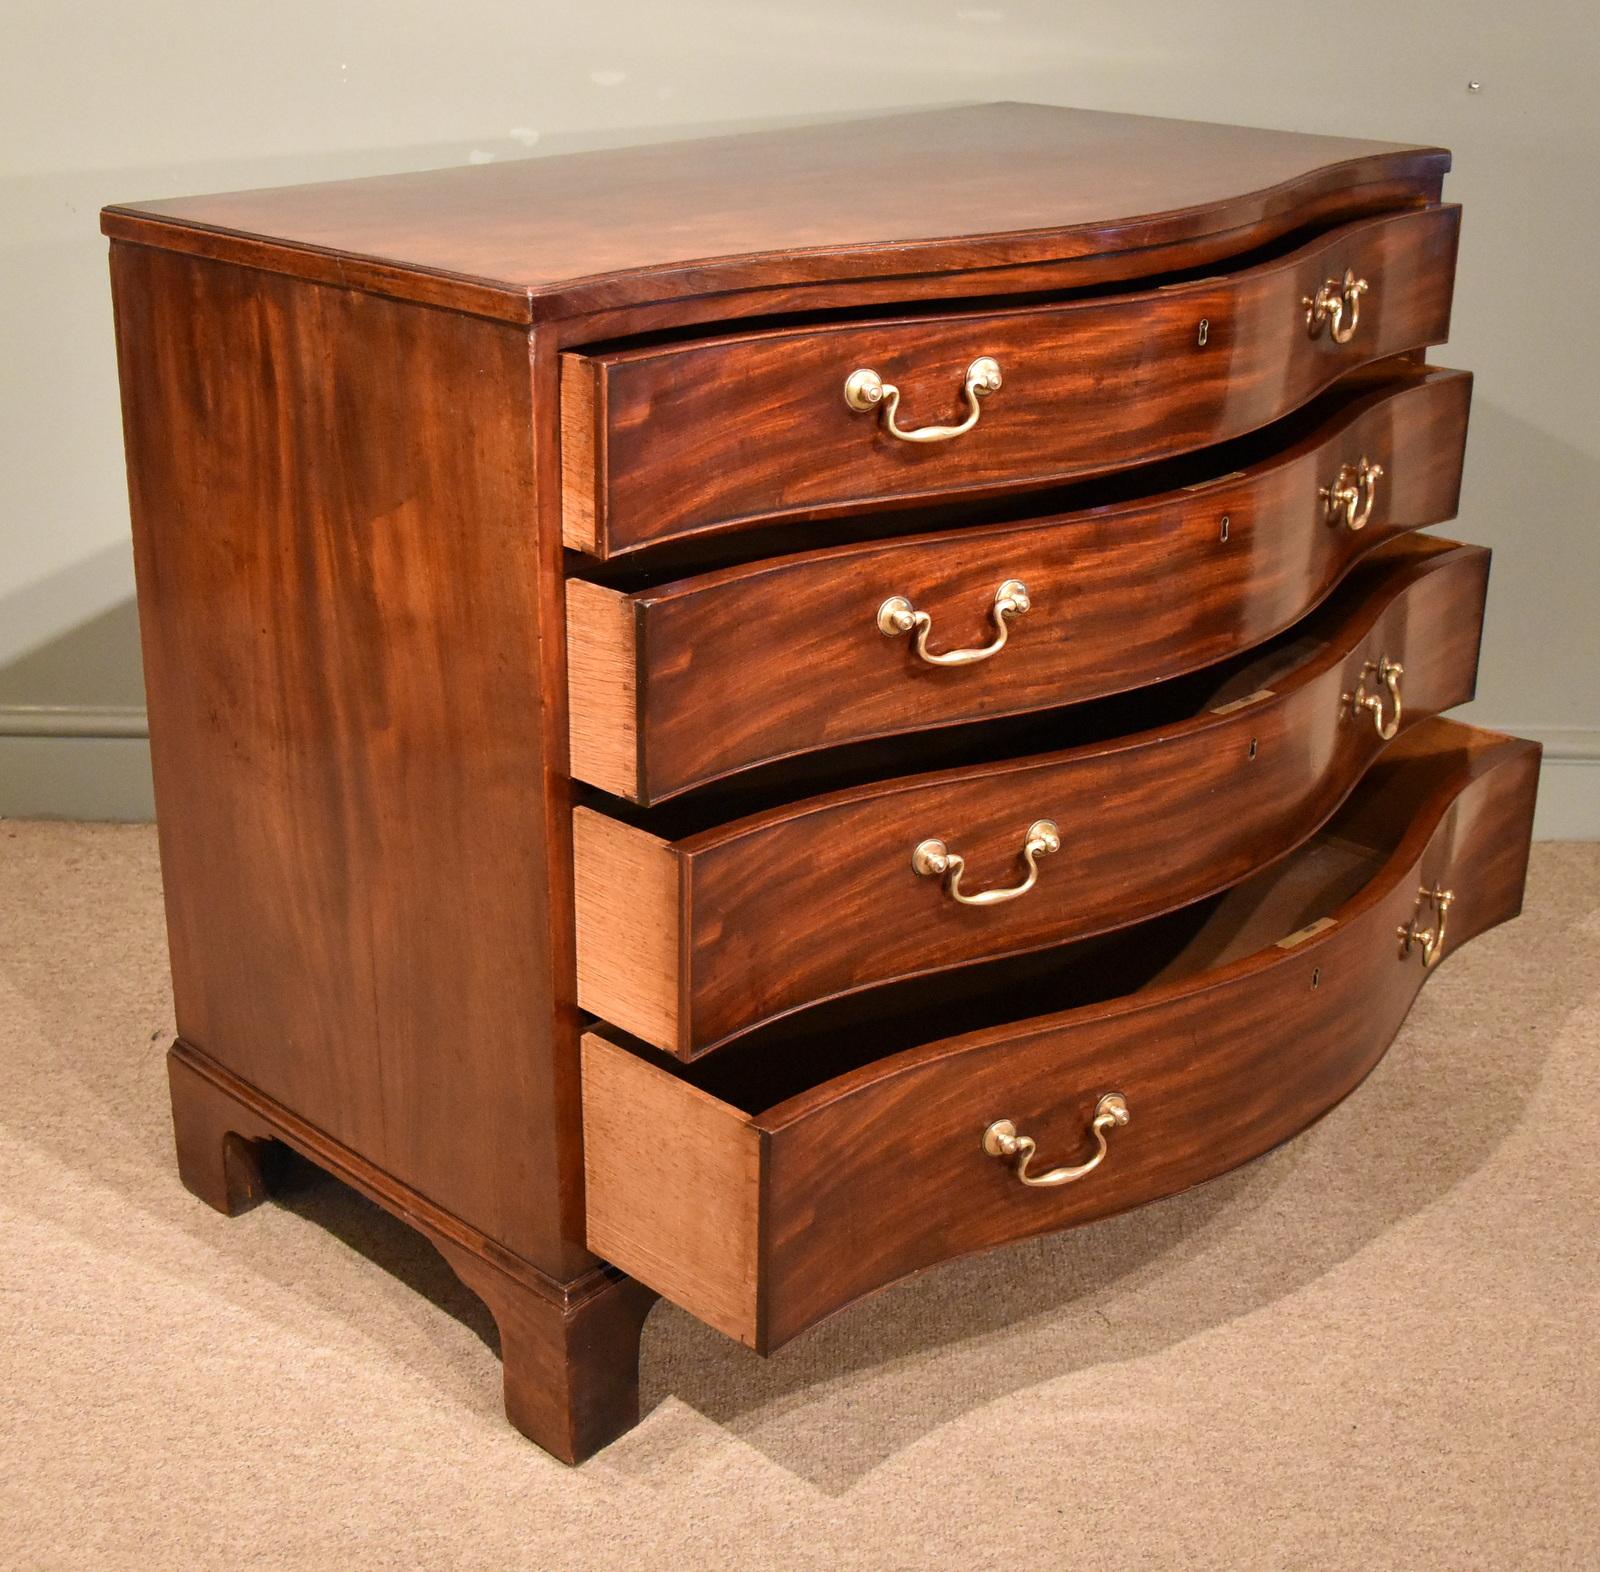 George III Serpentine Fronted Mahogany Chest of Drawers In Good Condition For Sale In Wiltshire, GB